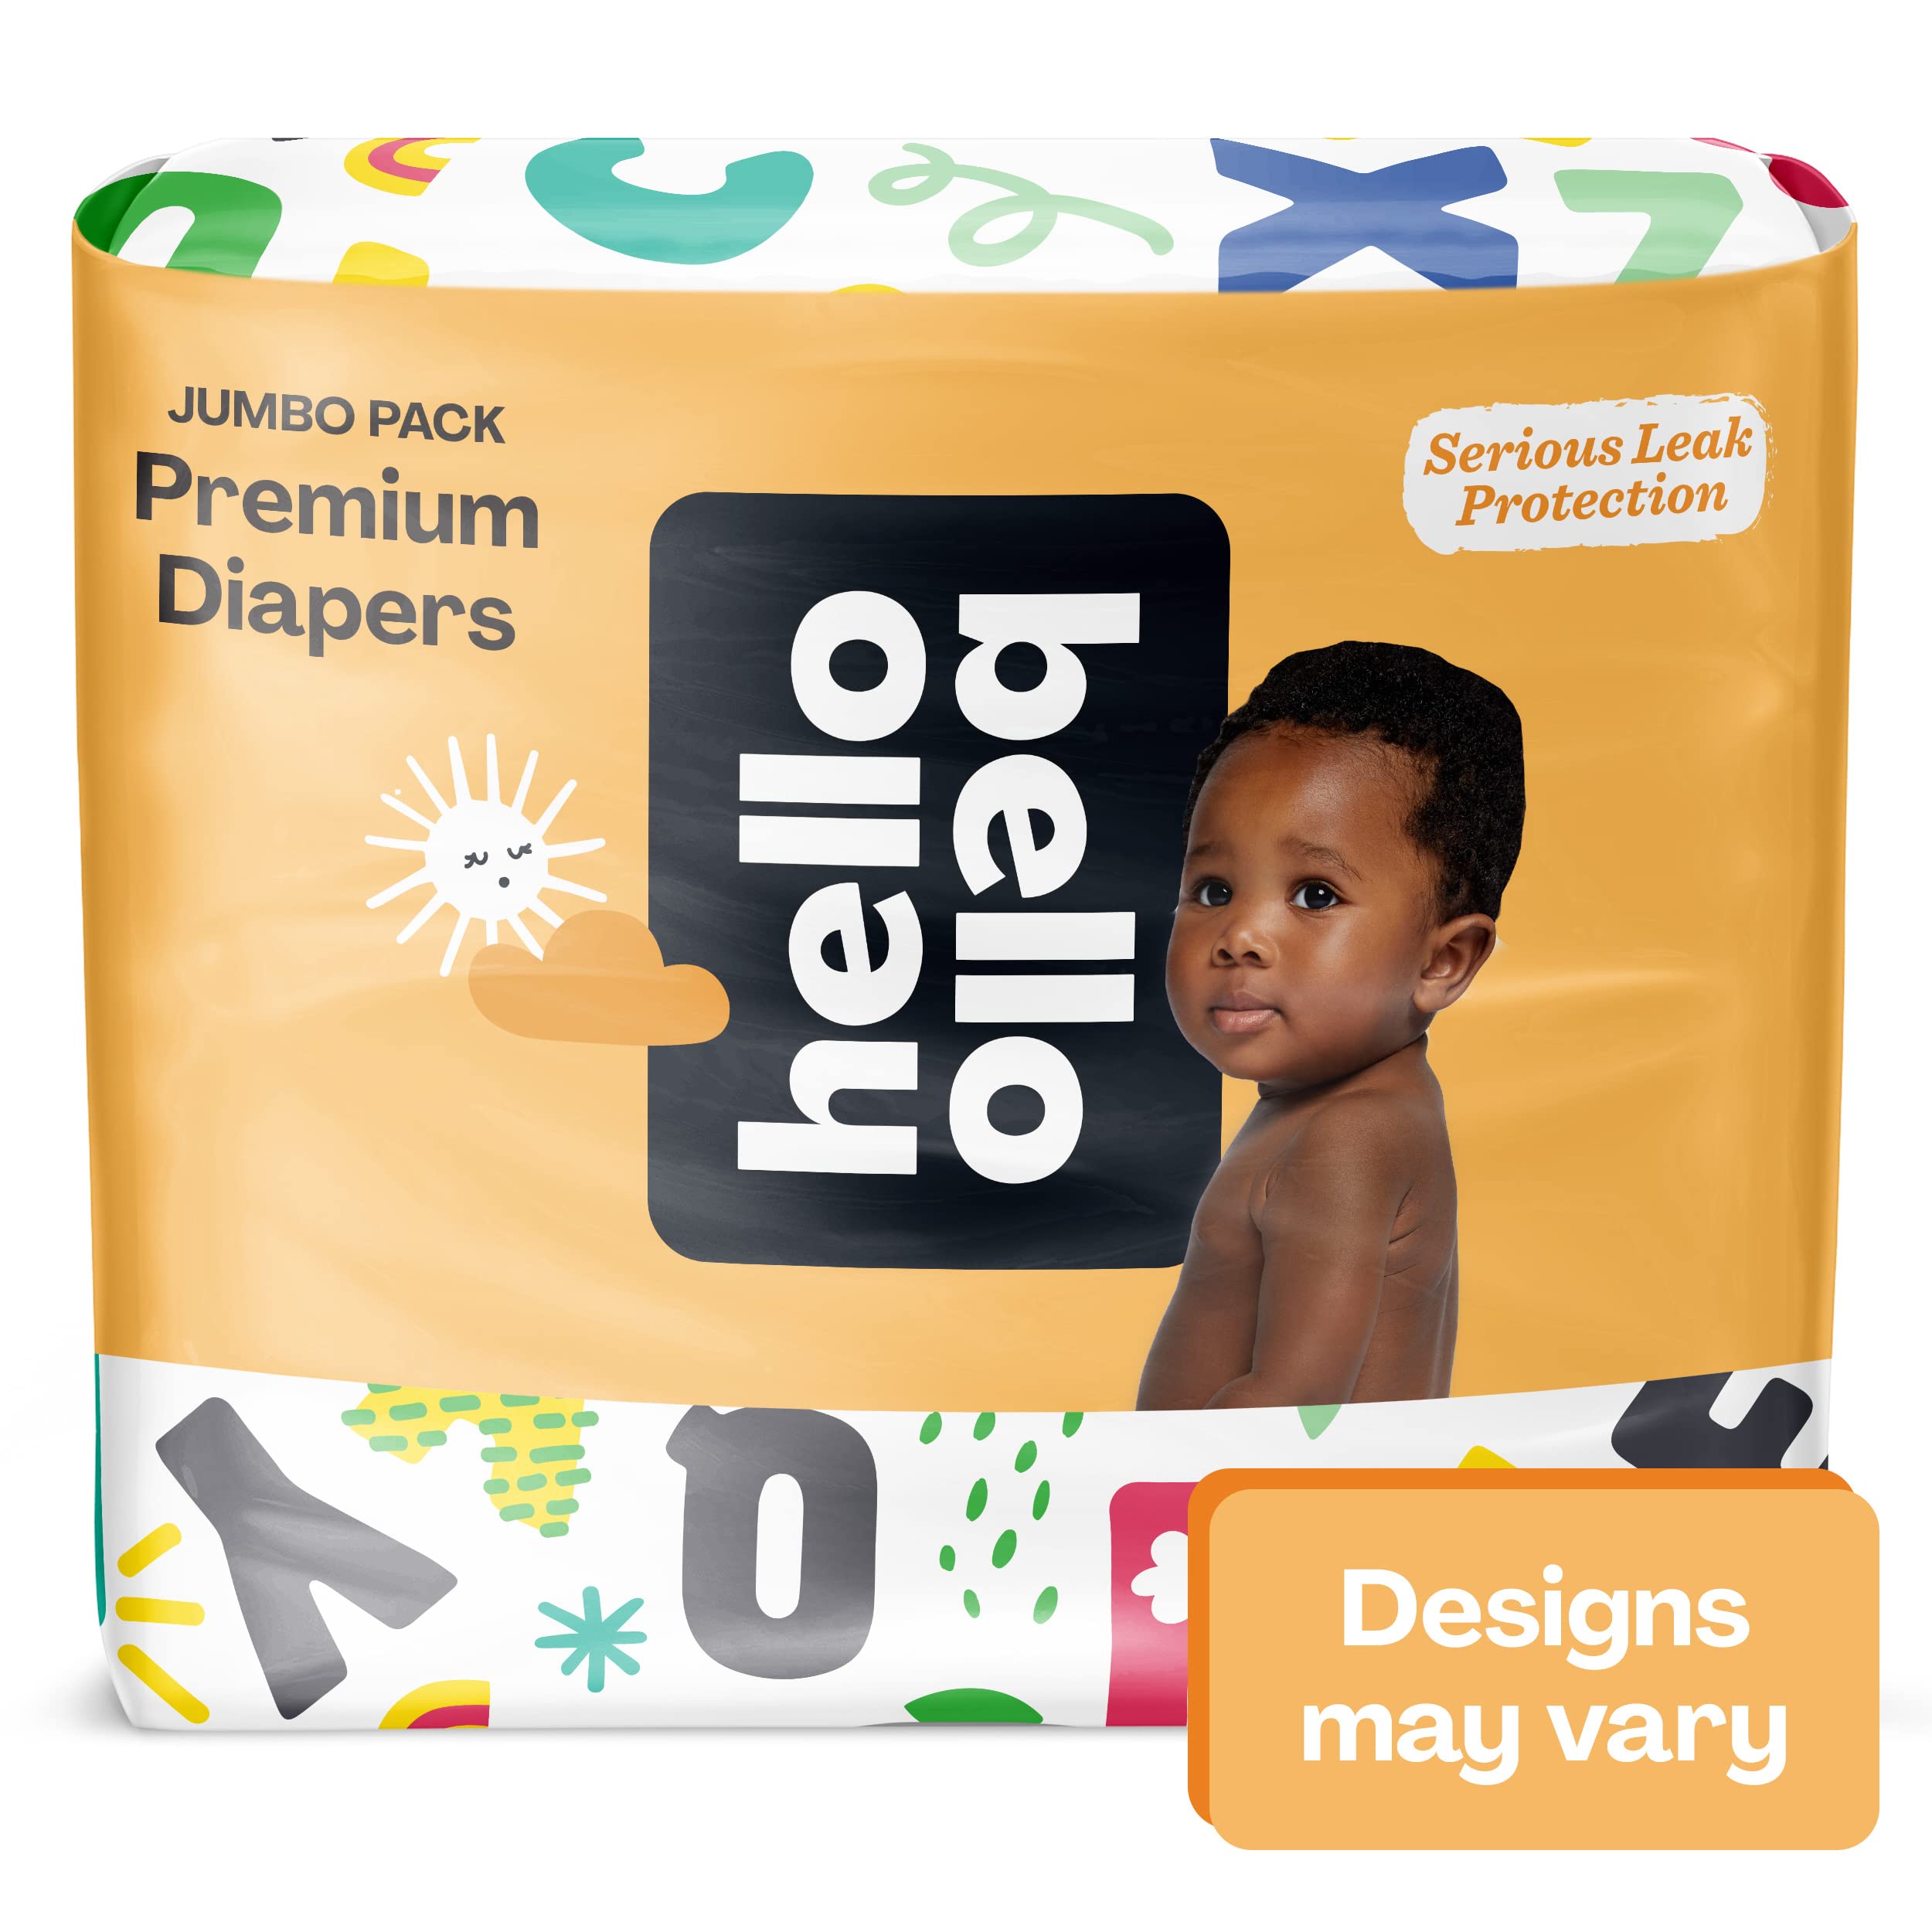 Hello Bello Premium Baby Diapers Size 4 I 84 Count of Disposable, Extra-Absorbent, Hypoallergenic, and Eco-Friendly Baby Diapers with Snug and Comfort Fit I Surprise Girl Patterns